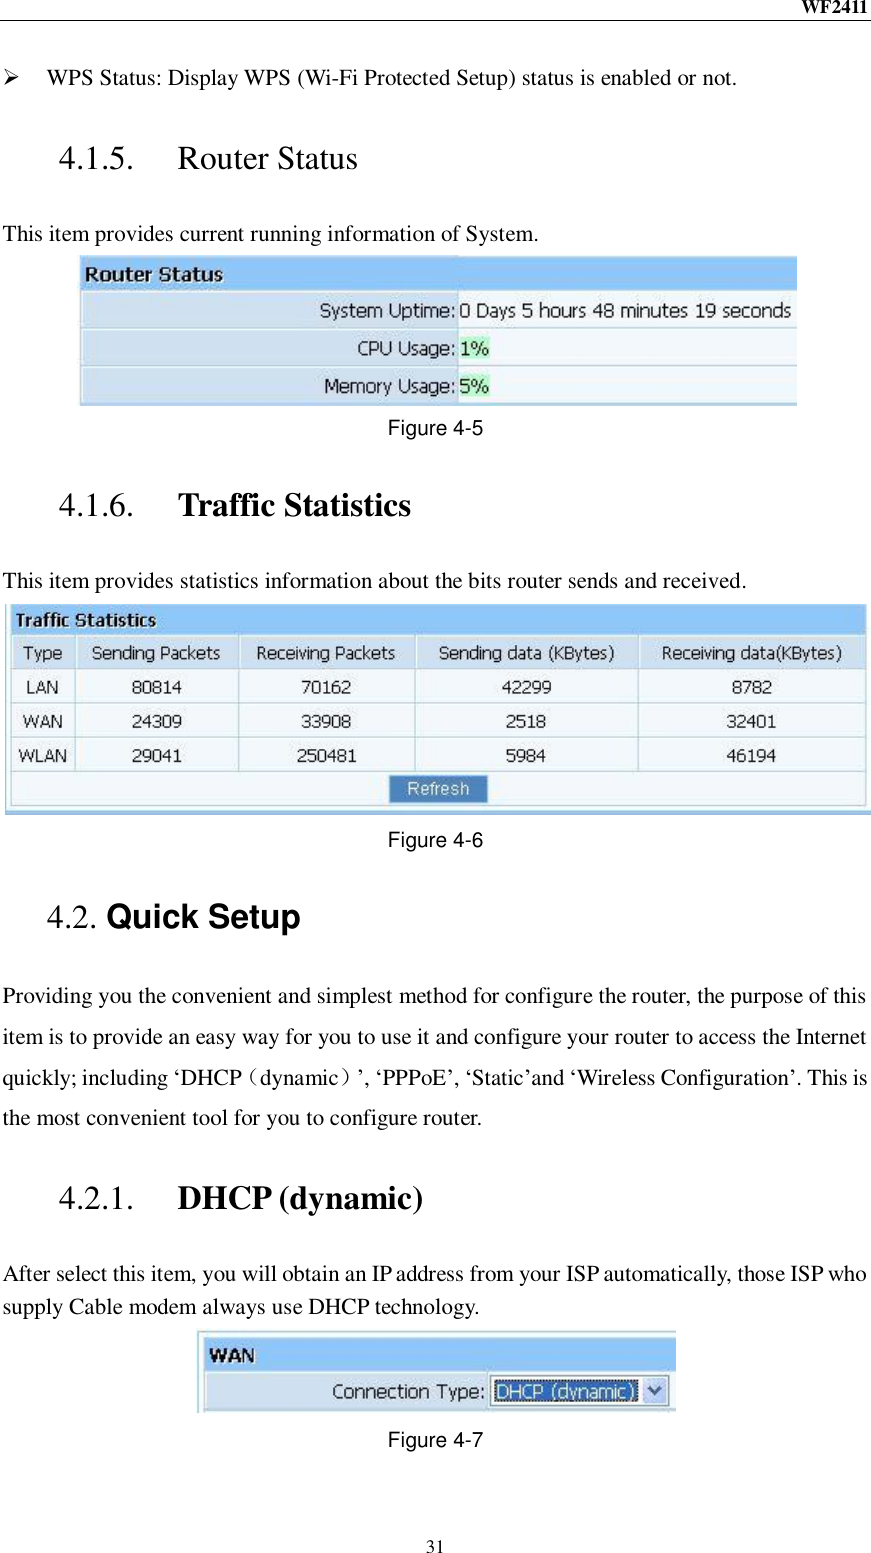 WF2411  31  WPS Status: Display WPS (Wi-Fi Protected Setup) status is enabled or not. 4.1.5. Router Status This item provides current running information of System.  Figure 4-5 4.1.6. Traffic Statistics This item provides statistics information about the bits router sends and received.  Figure 4-6 4.2. Quick Setup Providing you the convenient and simplest method for configure the router, the purpose of this item is to provide an easy way for you to use it and configure your router to access the Internet quickly; including „DHCP（dynamic）‟, „PPPoE‟, „Static‟and „Wireless Configuration‟. This is the most convenient tool for you to configure router. 4.2.1. DHCP (dynamic) After select this item, you will obtain an IP address from your ISP automatically, those ISP who supply Cable modem always use DHCP technology.  Figure 4-7 